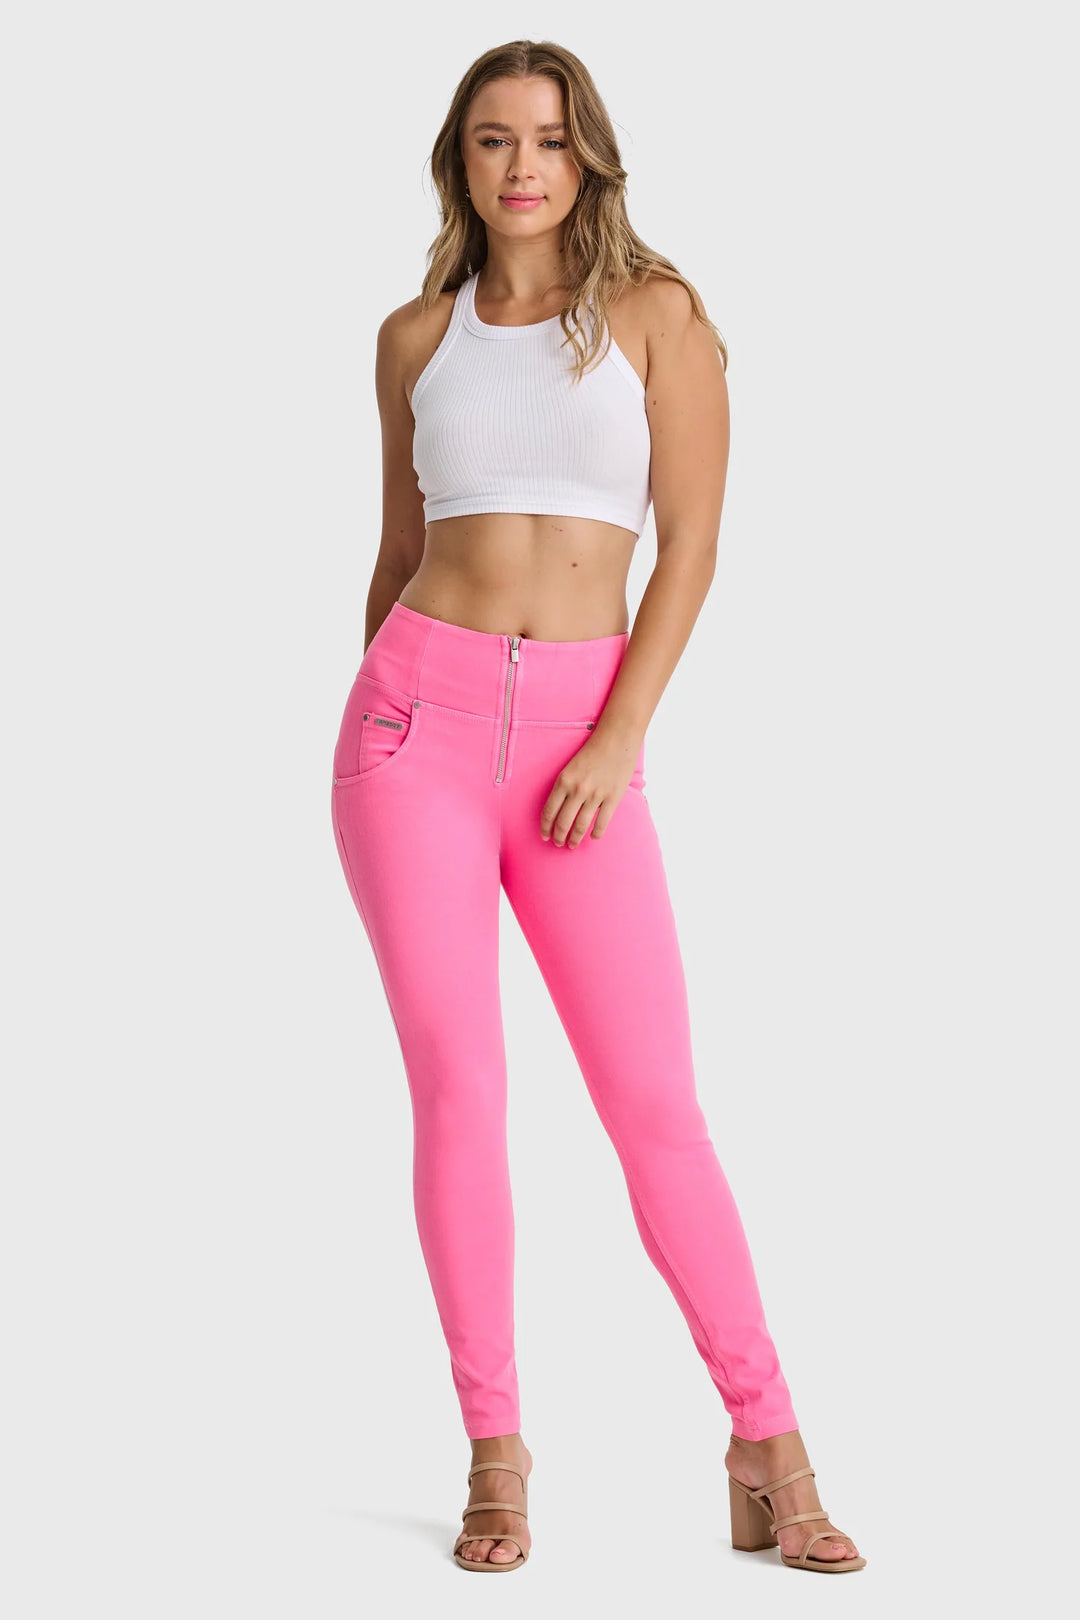 Freddy Pants Banner - WR.UP® Snug Jeans - High Waisted - Full Length - Candy Pink